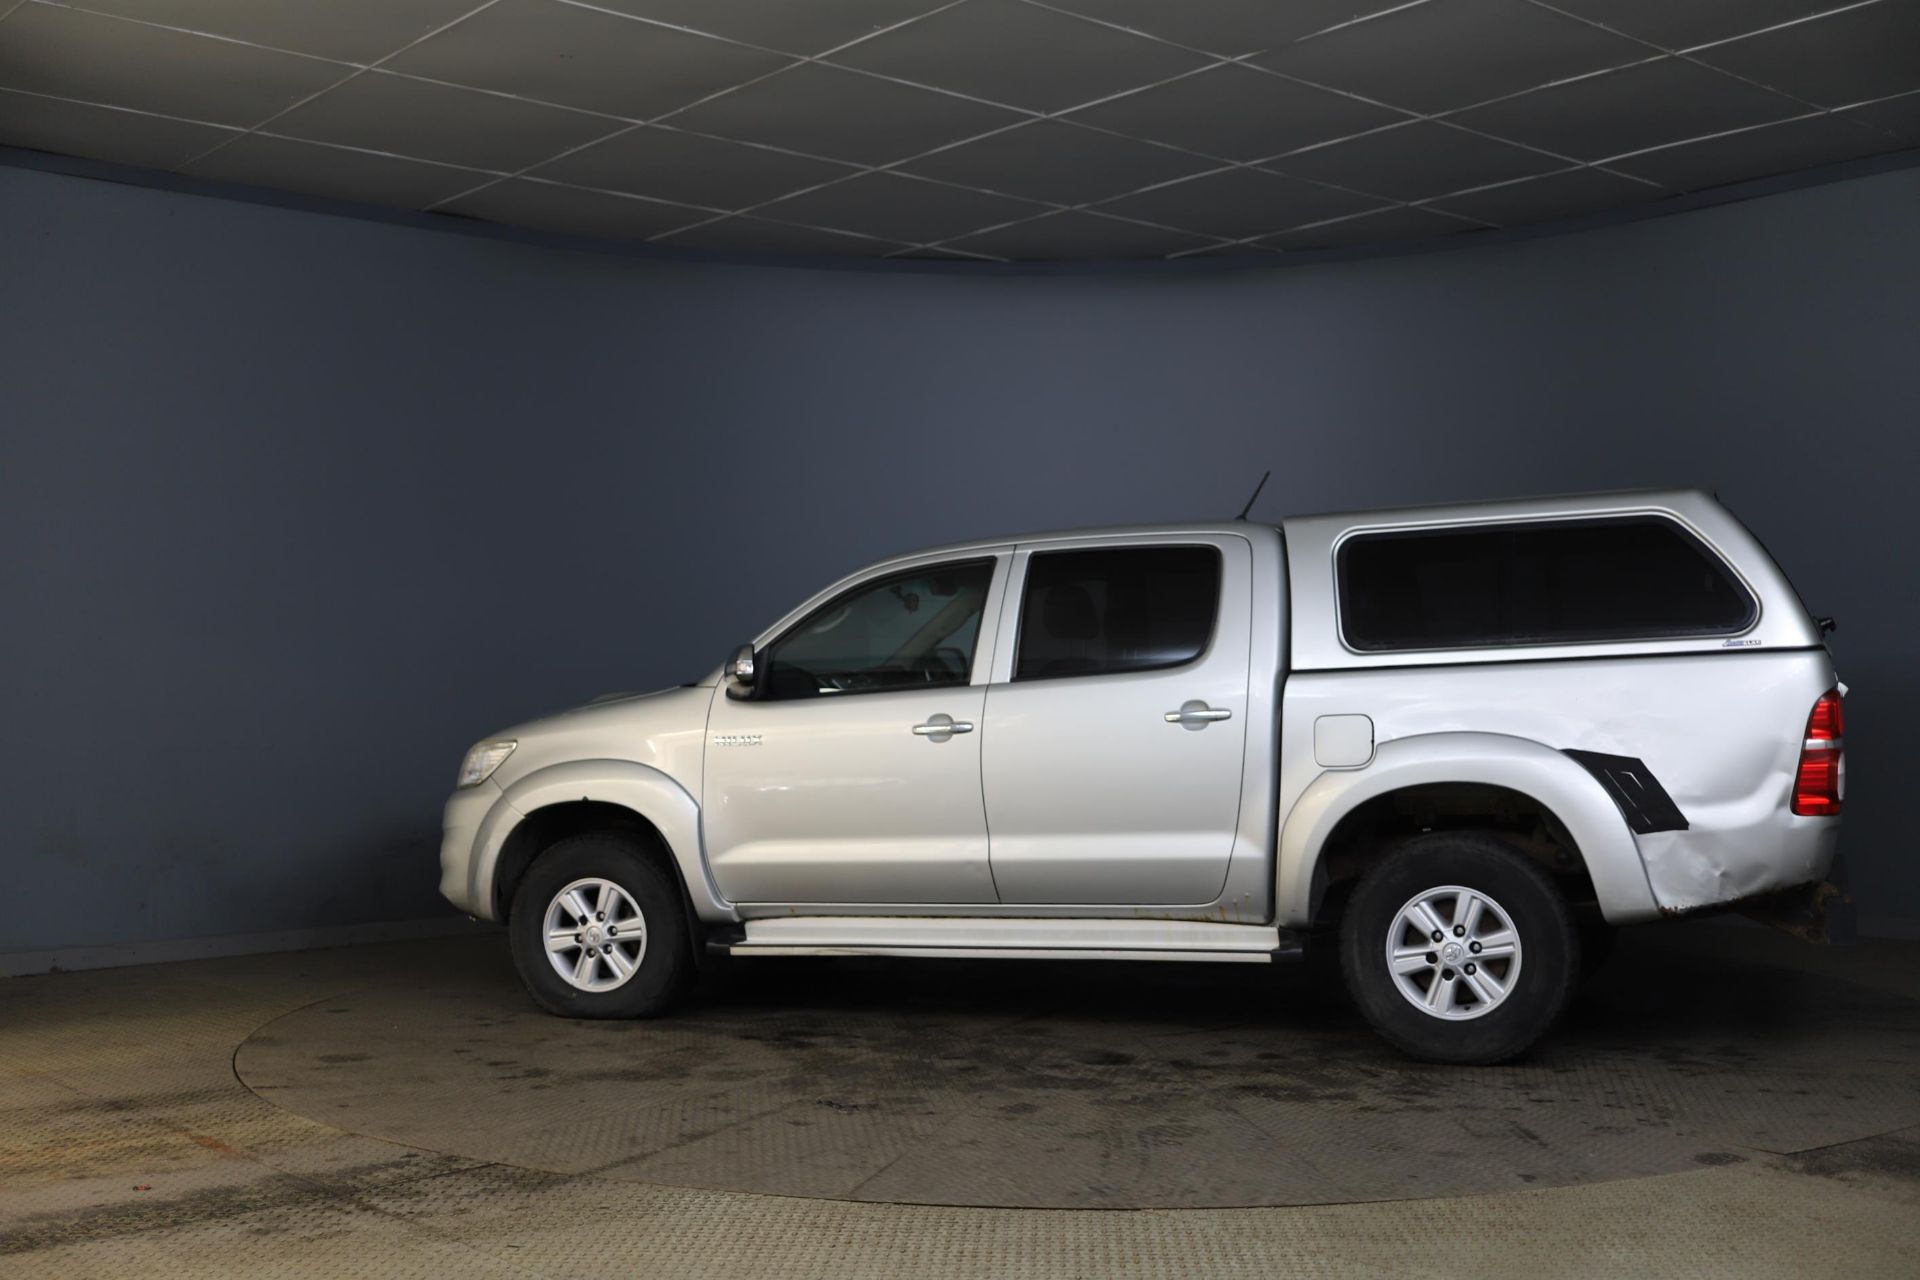 TOYOTA HILUX 2.4D-4D "Active" Double Cab Pick Up - 2013 13 Reg - 1 Owner - Only 28K Miles - Image 2 of 12